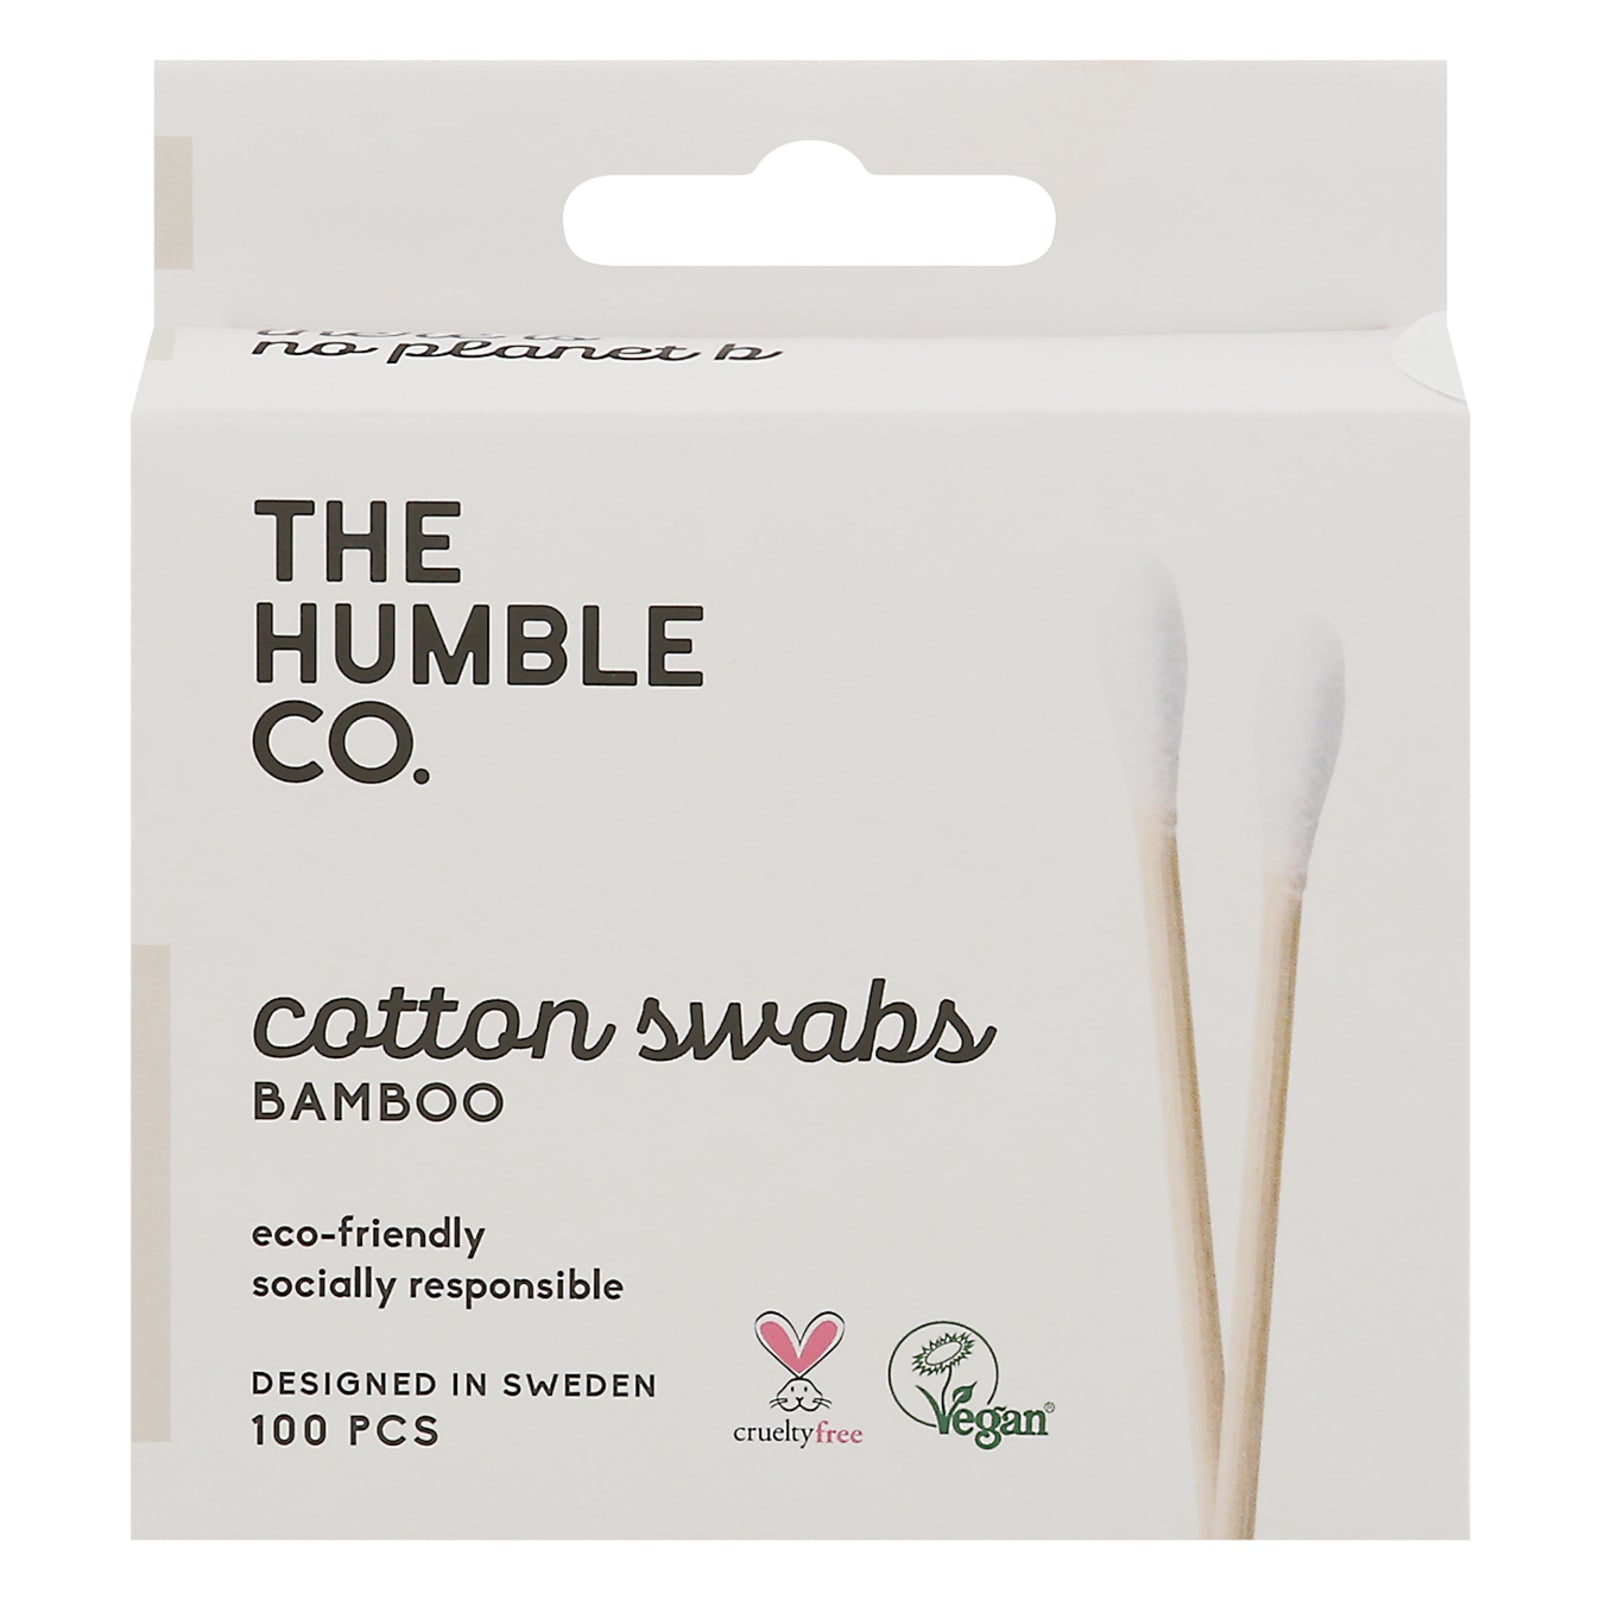 Humble Co - Bamboo Cotton Swabs - Case Of 10 - 100 Ct